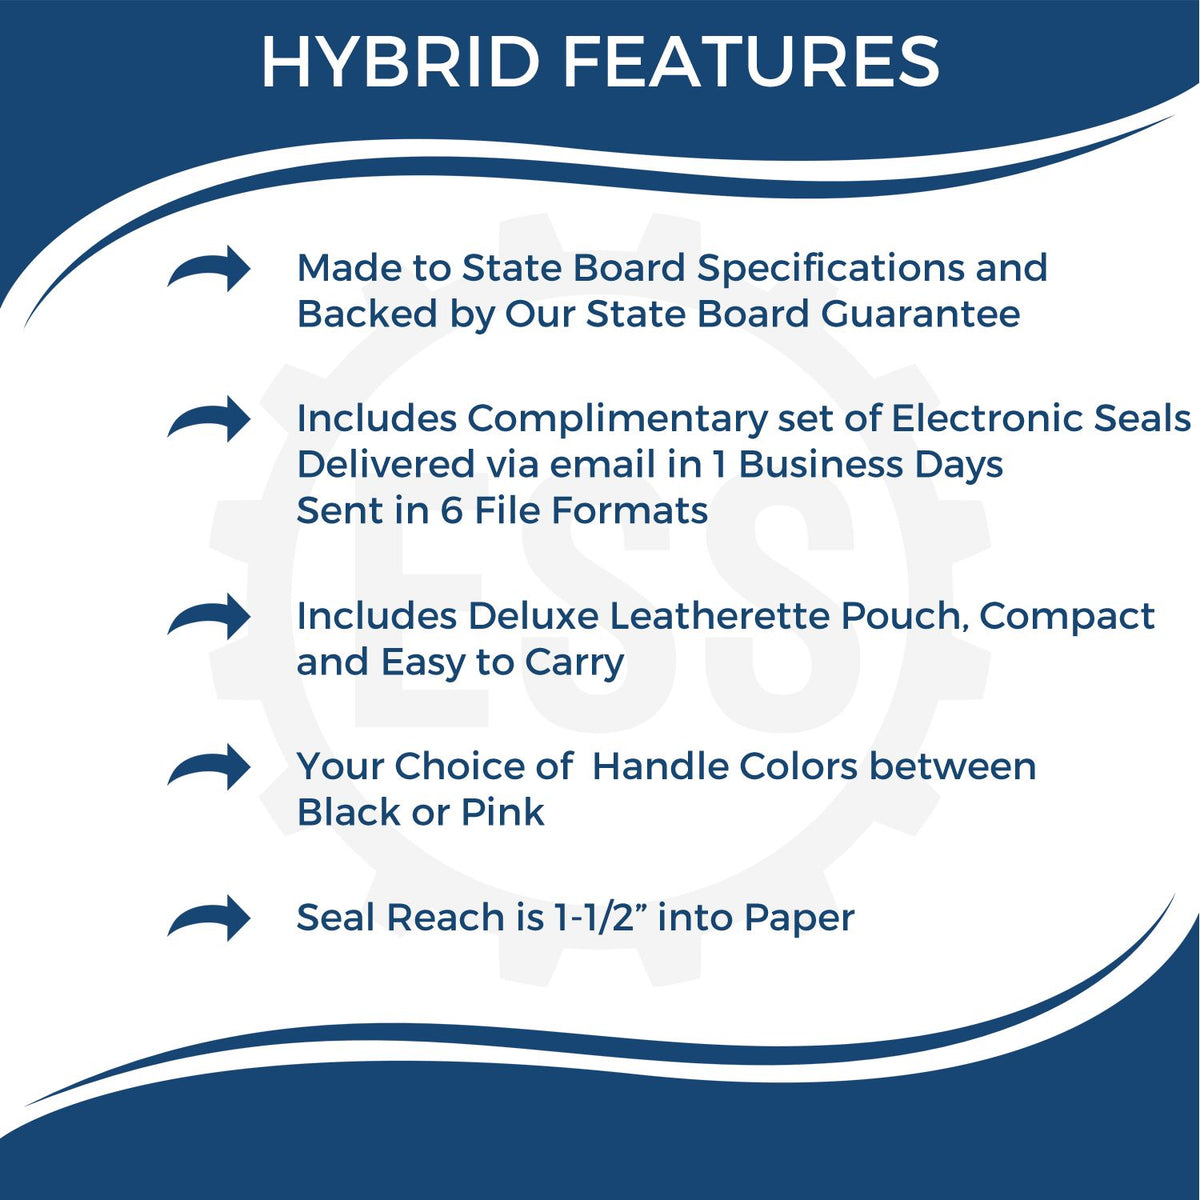 A picture of an infographic highlighting the selling points for the Hybrid Nebraska Land Surveyor Seal